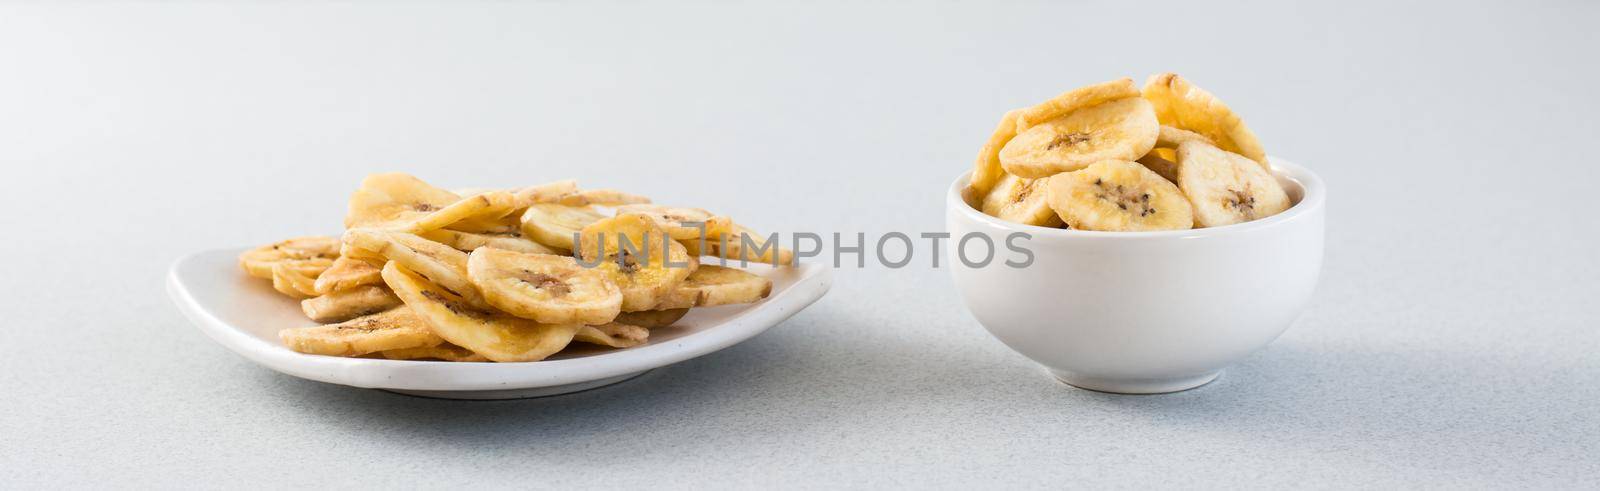 Baked banana chips in a white bowl and saucer on the table. Fast food. Web banner